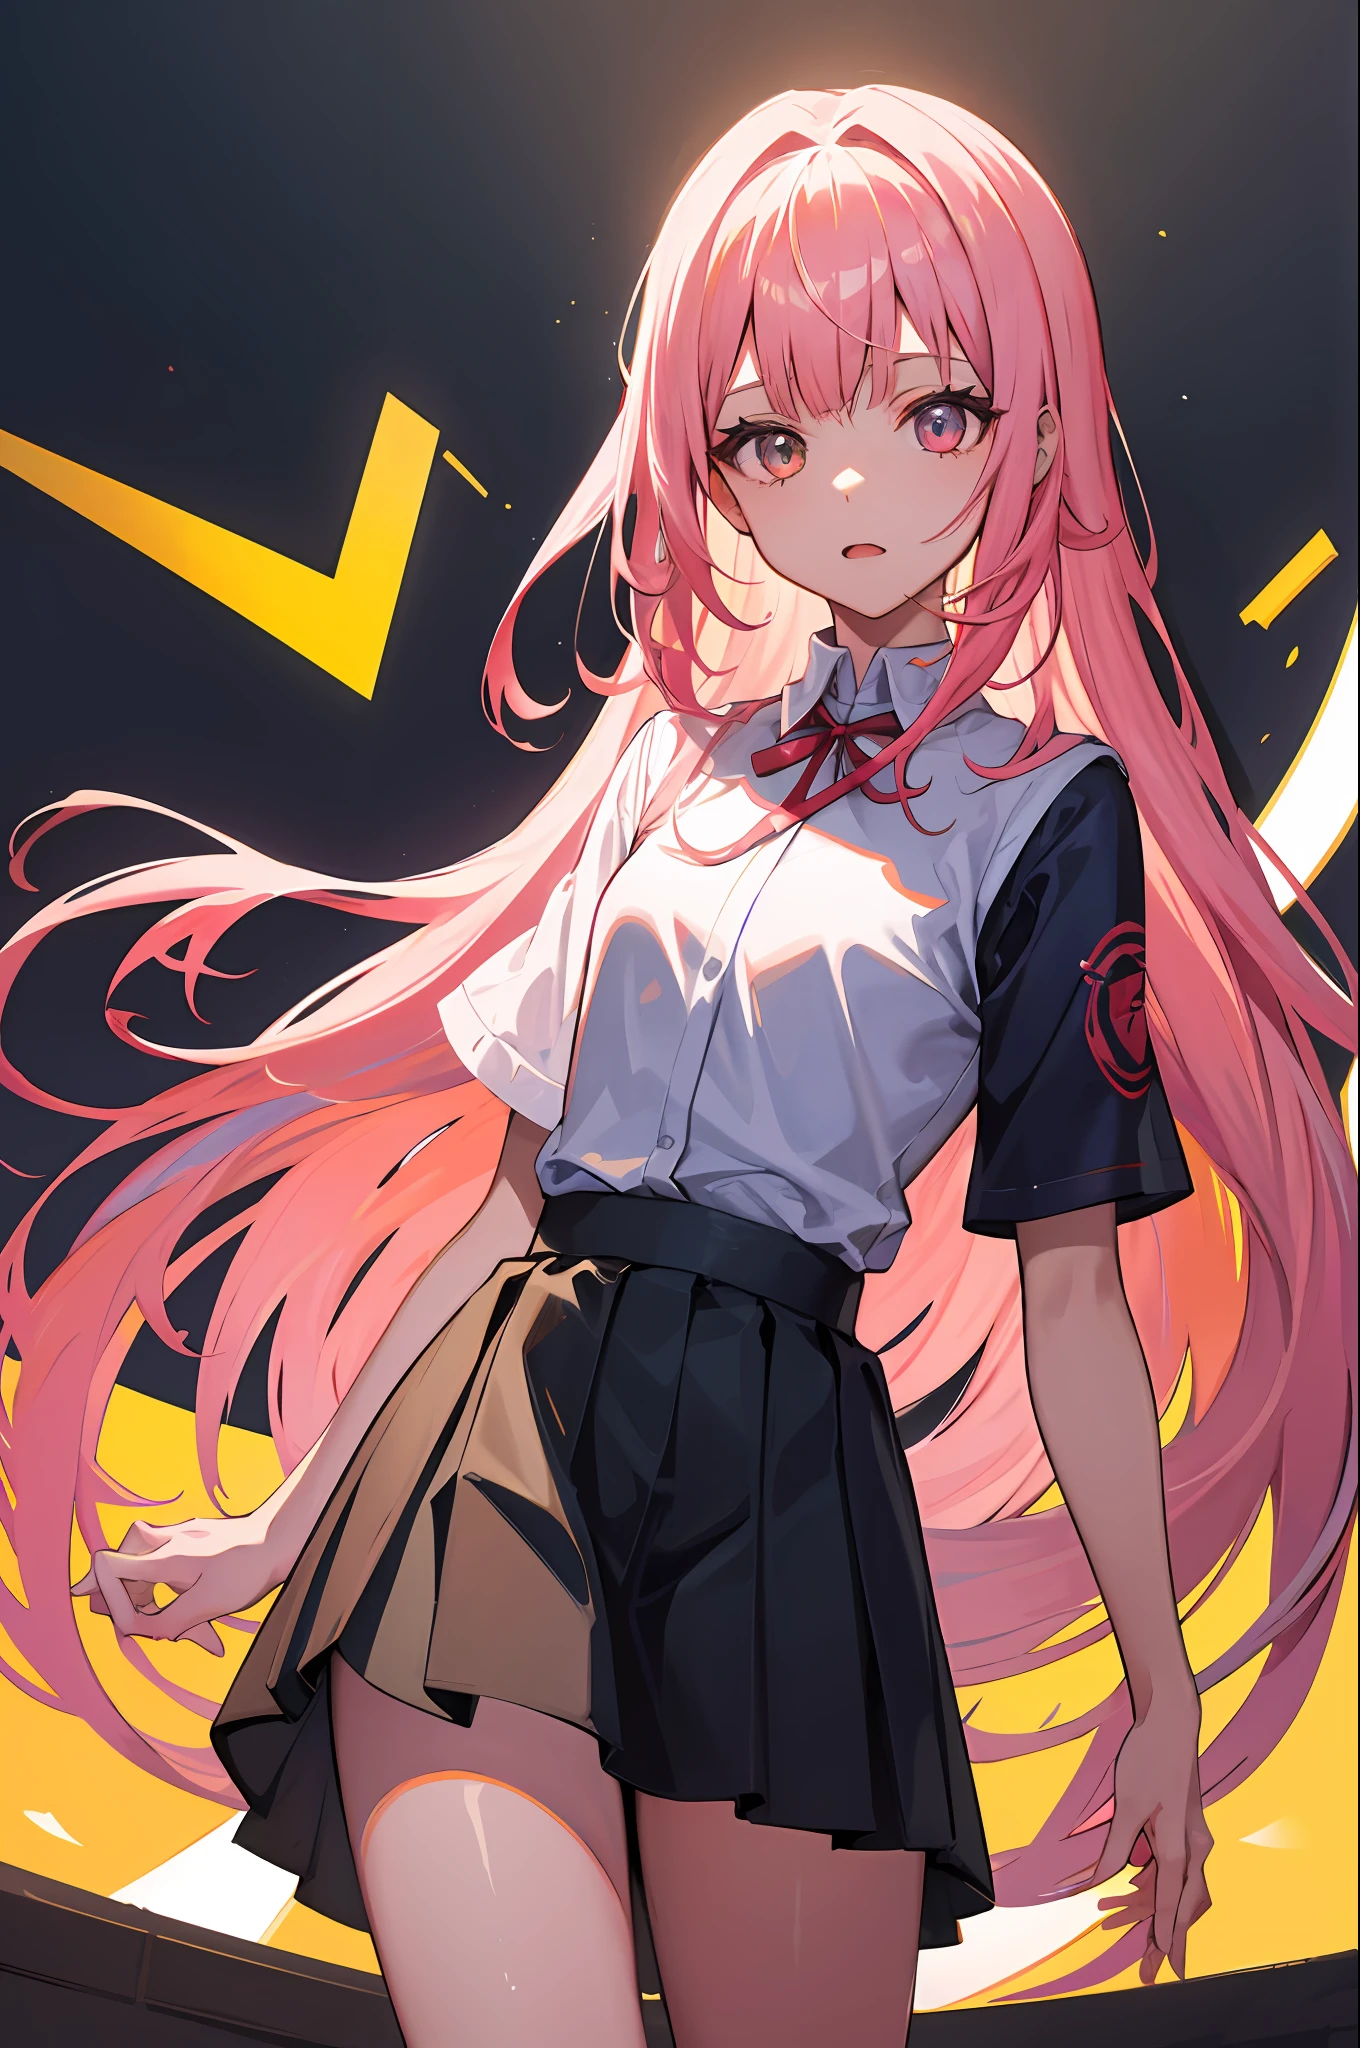 （absurderes， A high resolution， ultra - detailed）， 1 girl， solo， （Very long hair， Pink hair）， colorful， The finest details， 16 years old， small， Superskirt， Uniforms， short- sleeved， deep dark background， Santorini, Greece